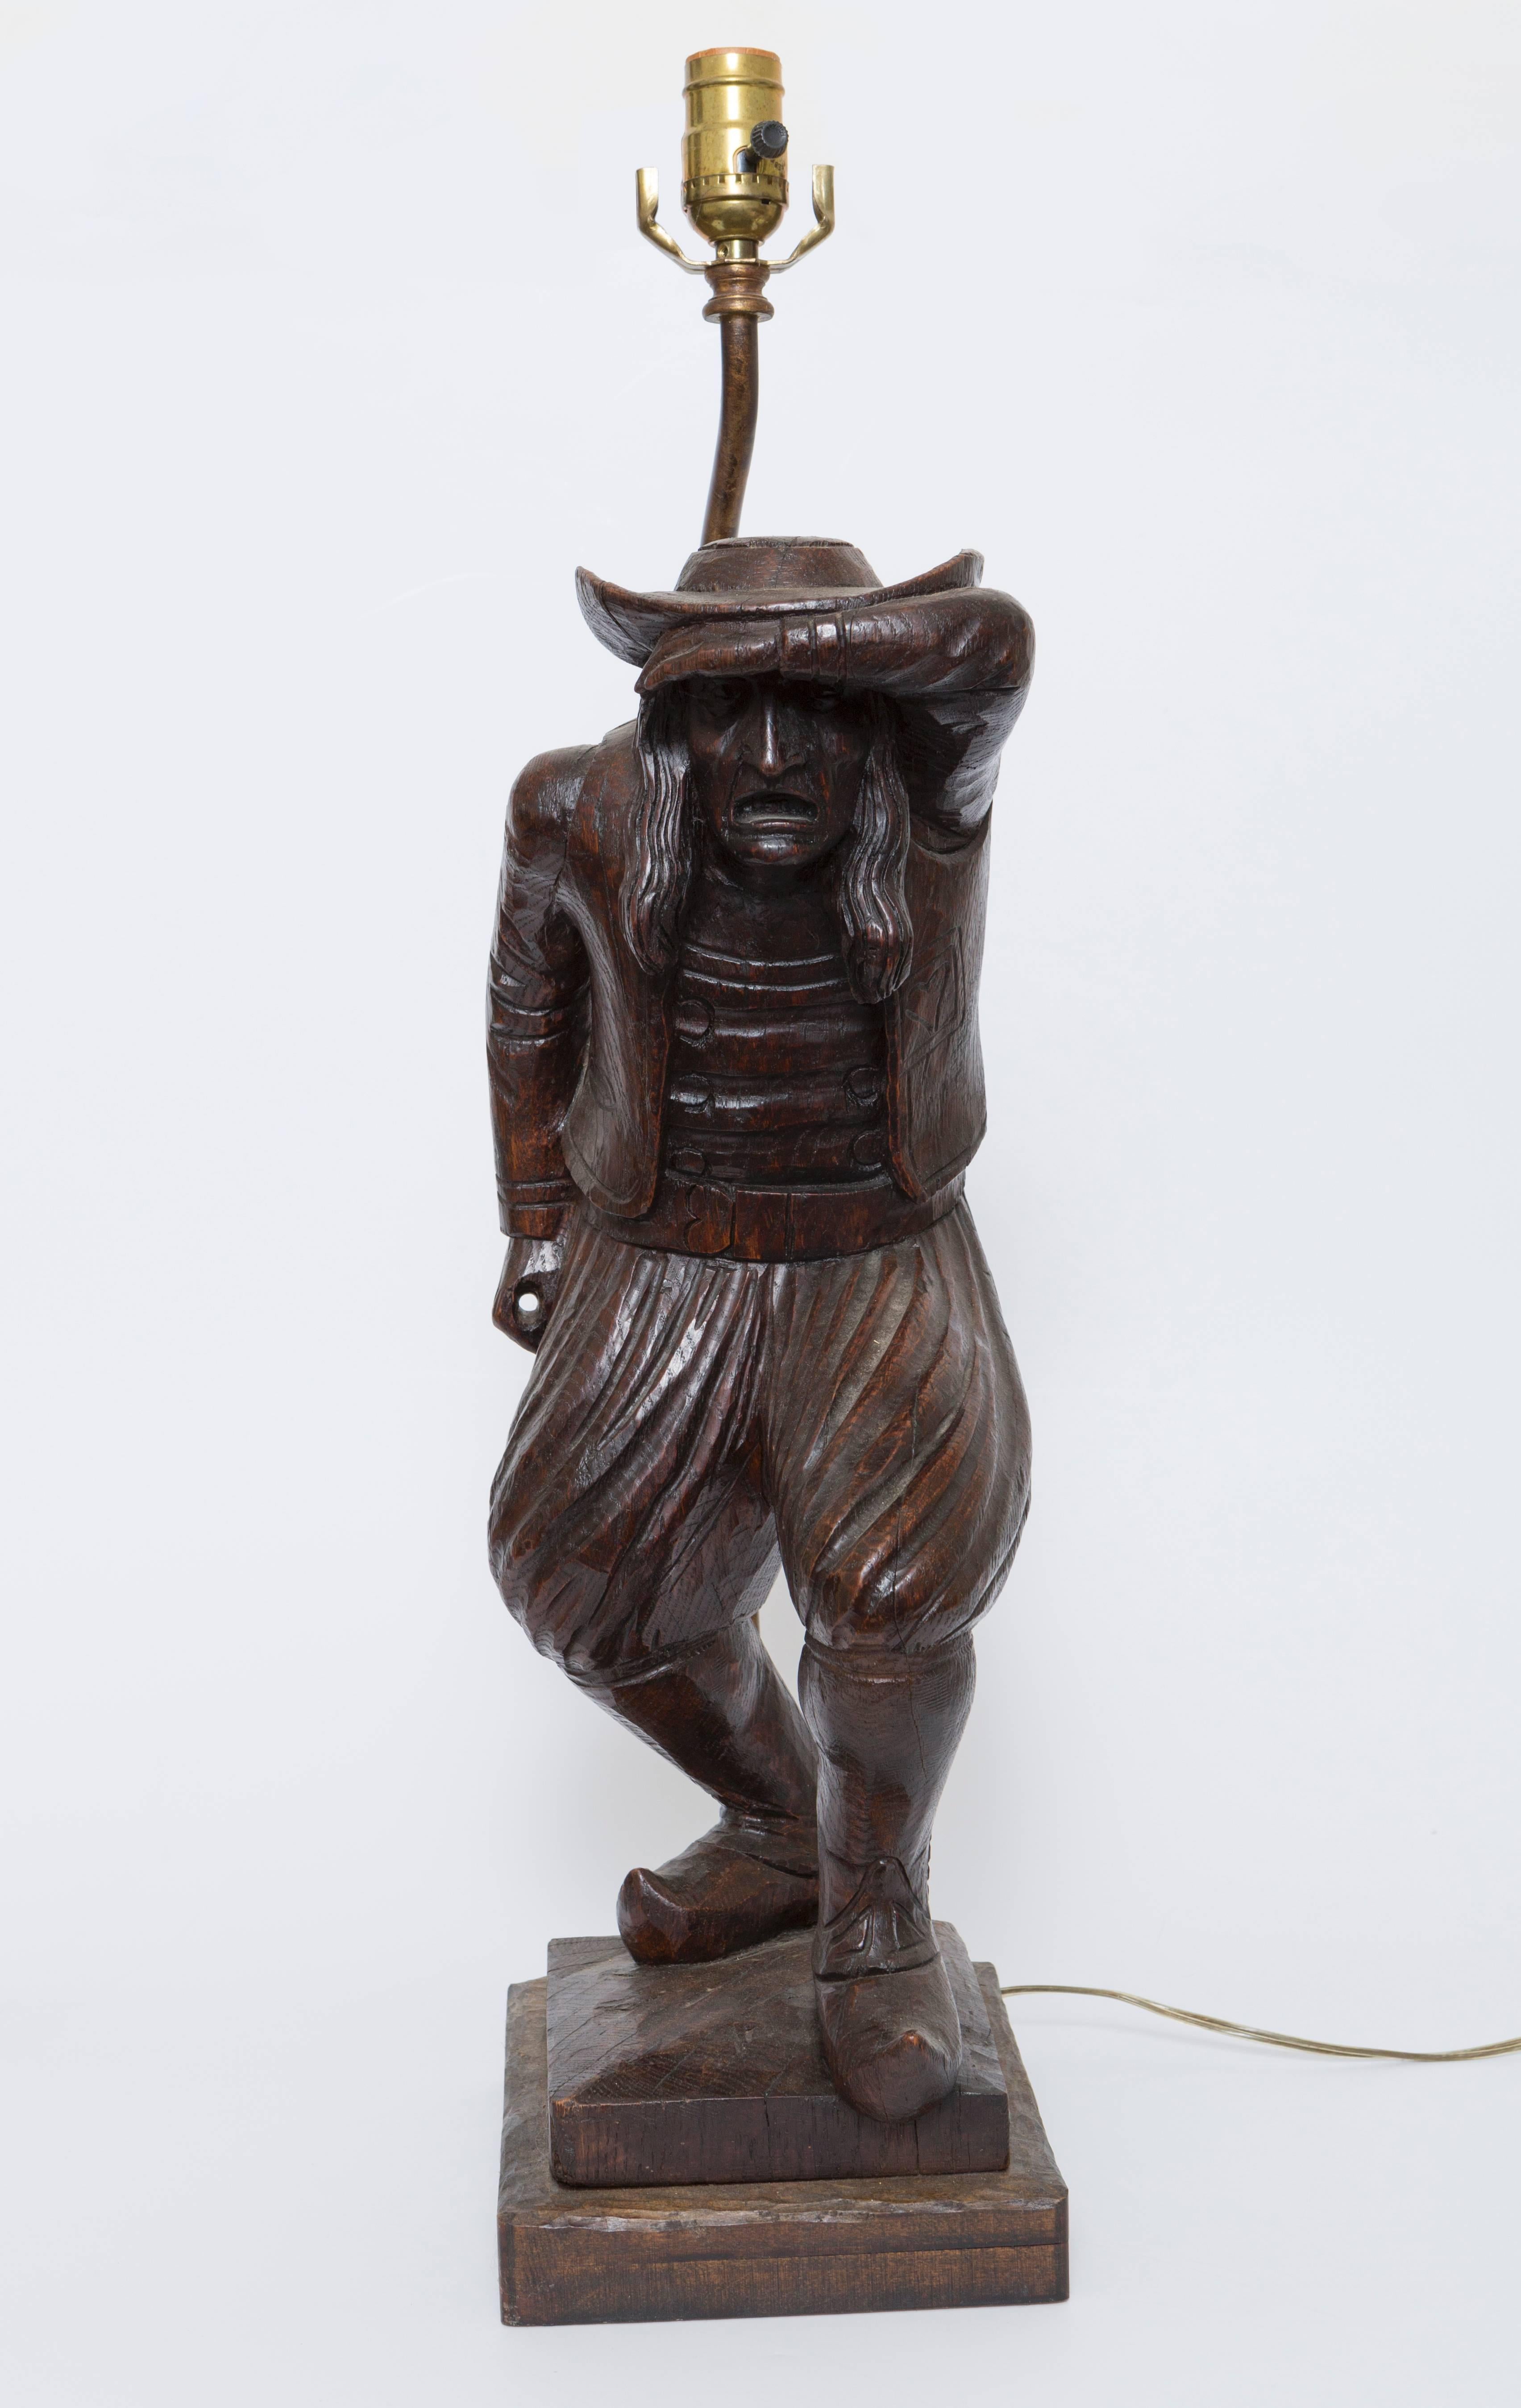 19th Century Wood Carved Lamp of a Brittany Man. This interesting wood carved lamp of man on the 